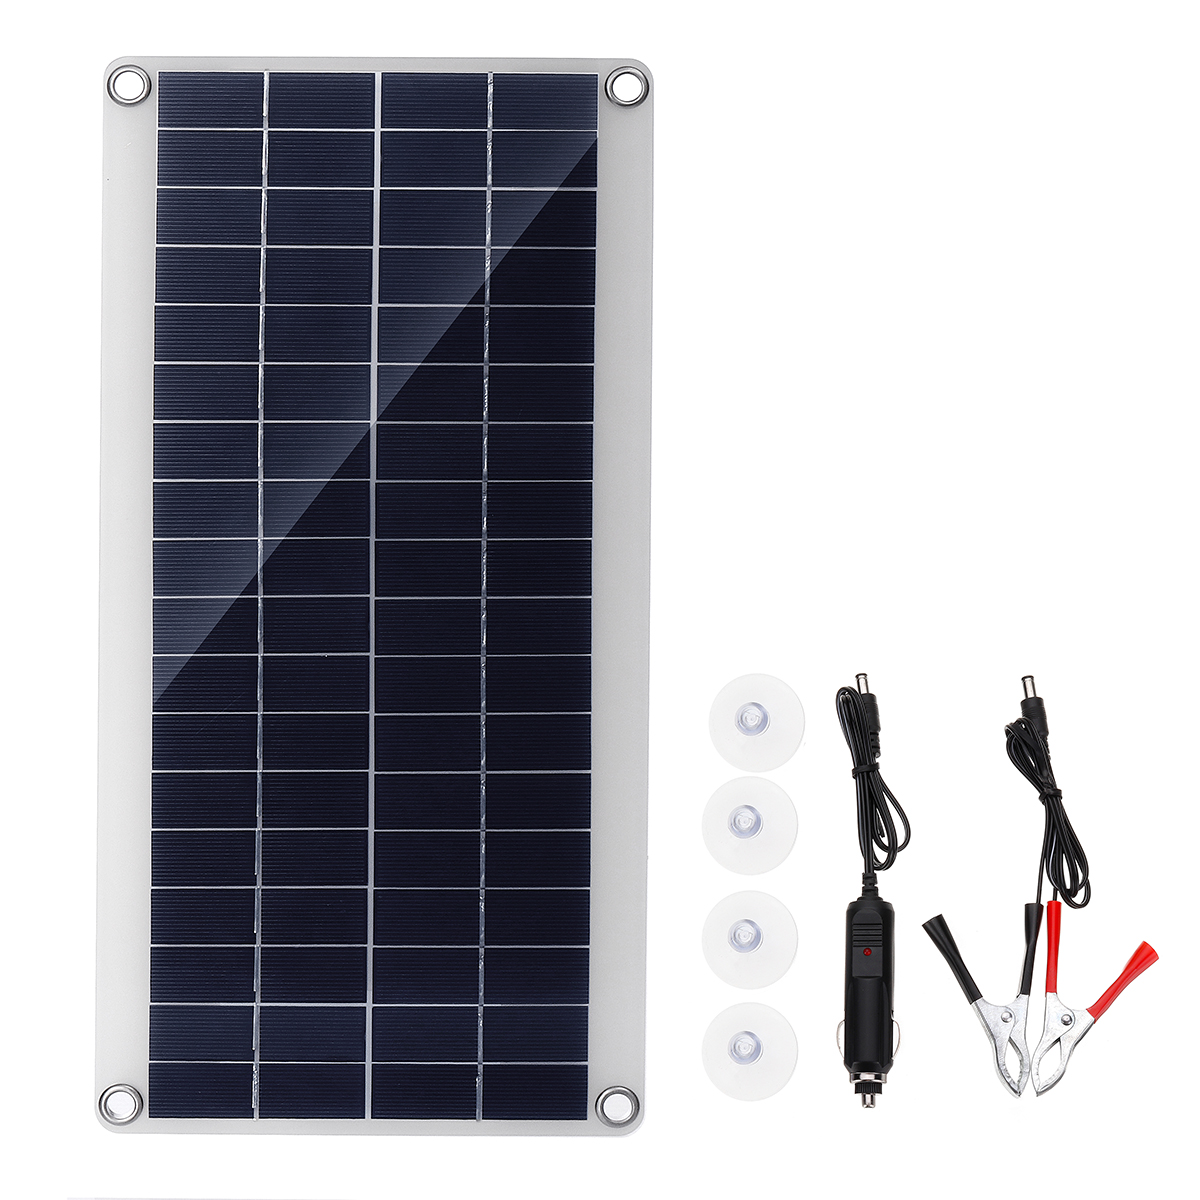 

15W Portable Solar Panel Kit DC USB Charging Double USB Port Suction Cups Camping Traveling